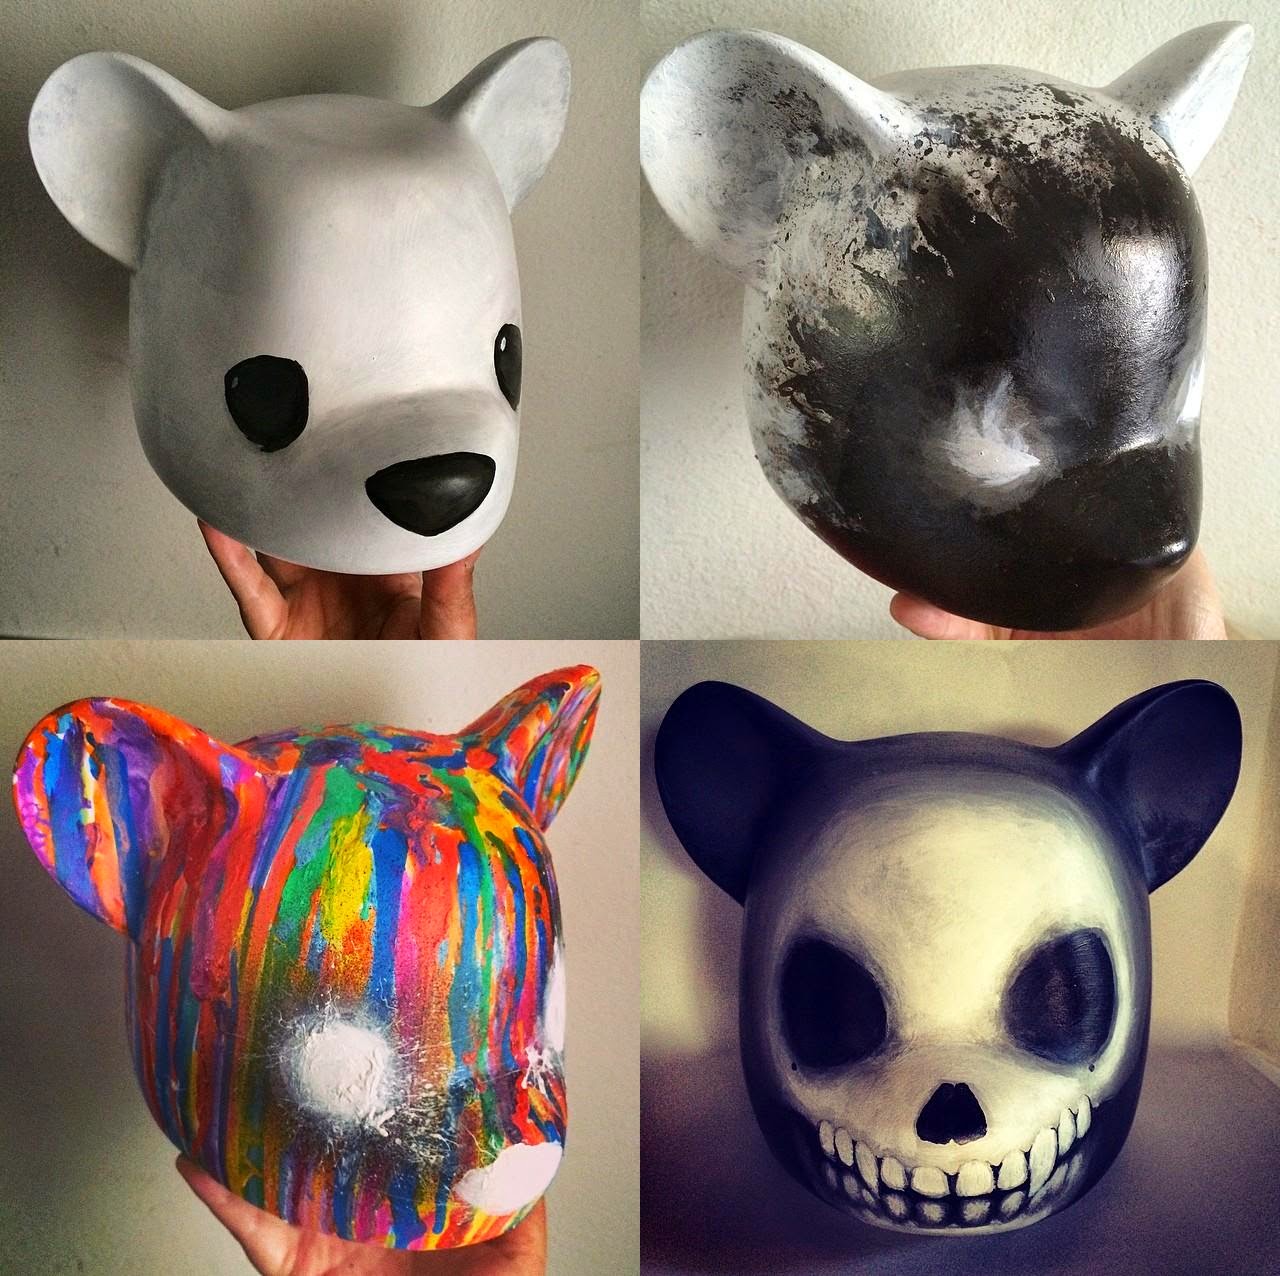 Clutter Gallery presents Luke Chueh “HEADS” Solo Art Show - Regular Bear Head, Blackend, Luke Chueh and the Psychedelic Experience & Skull